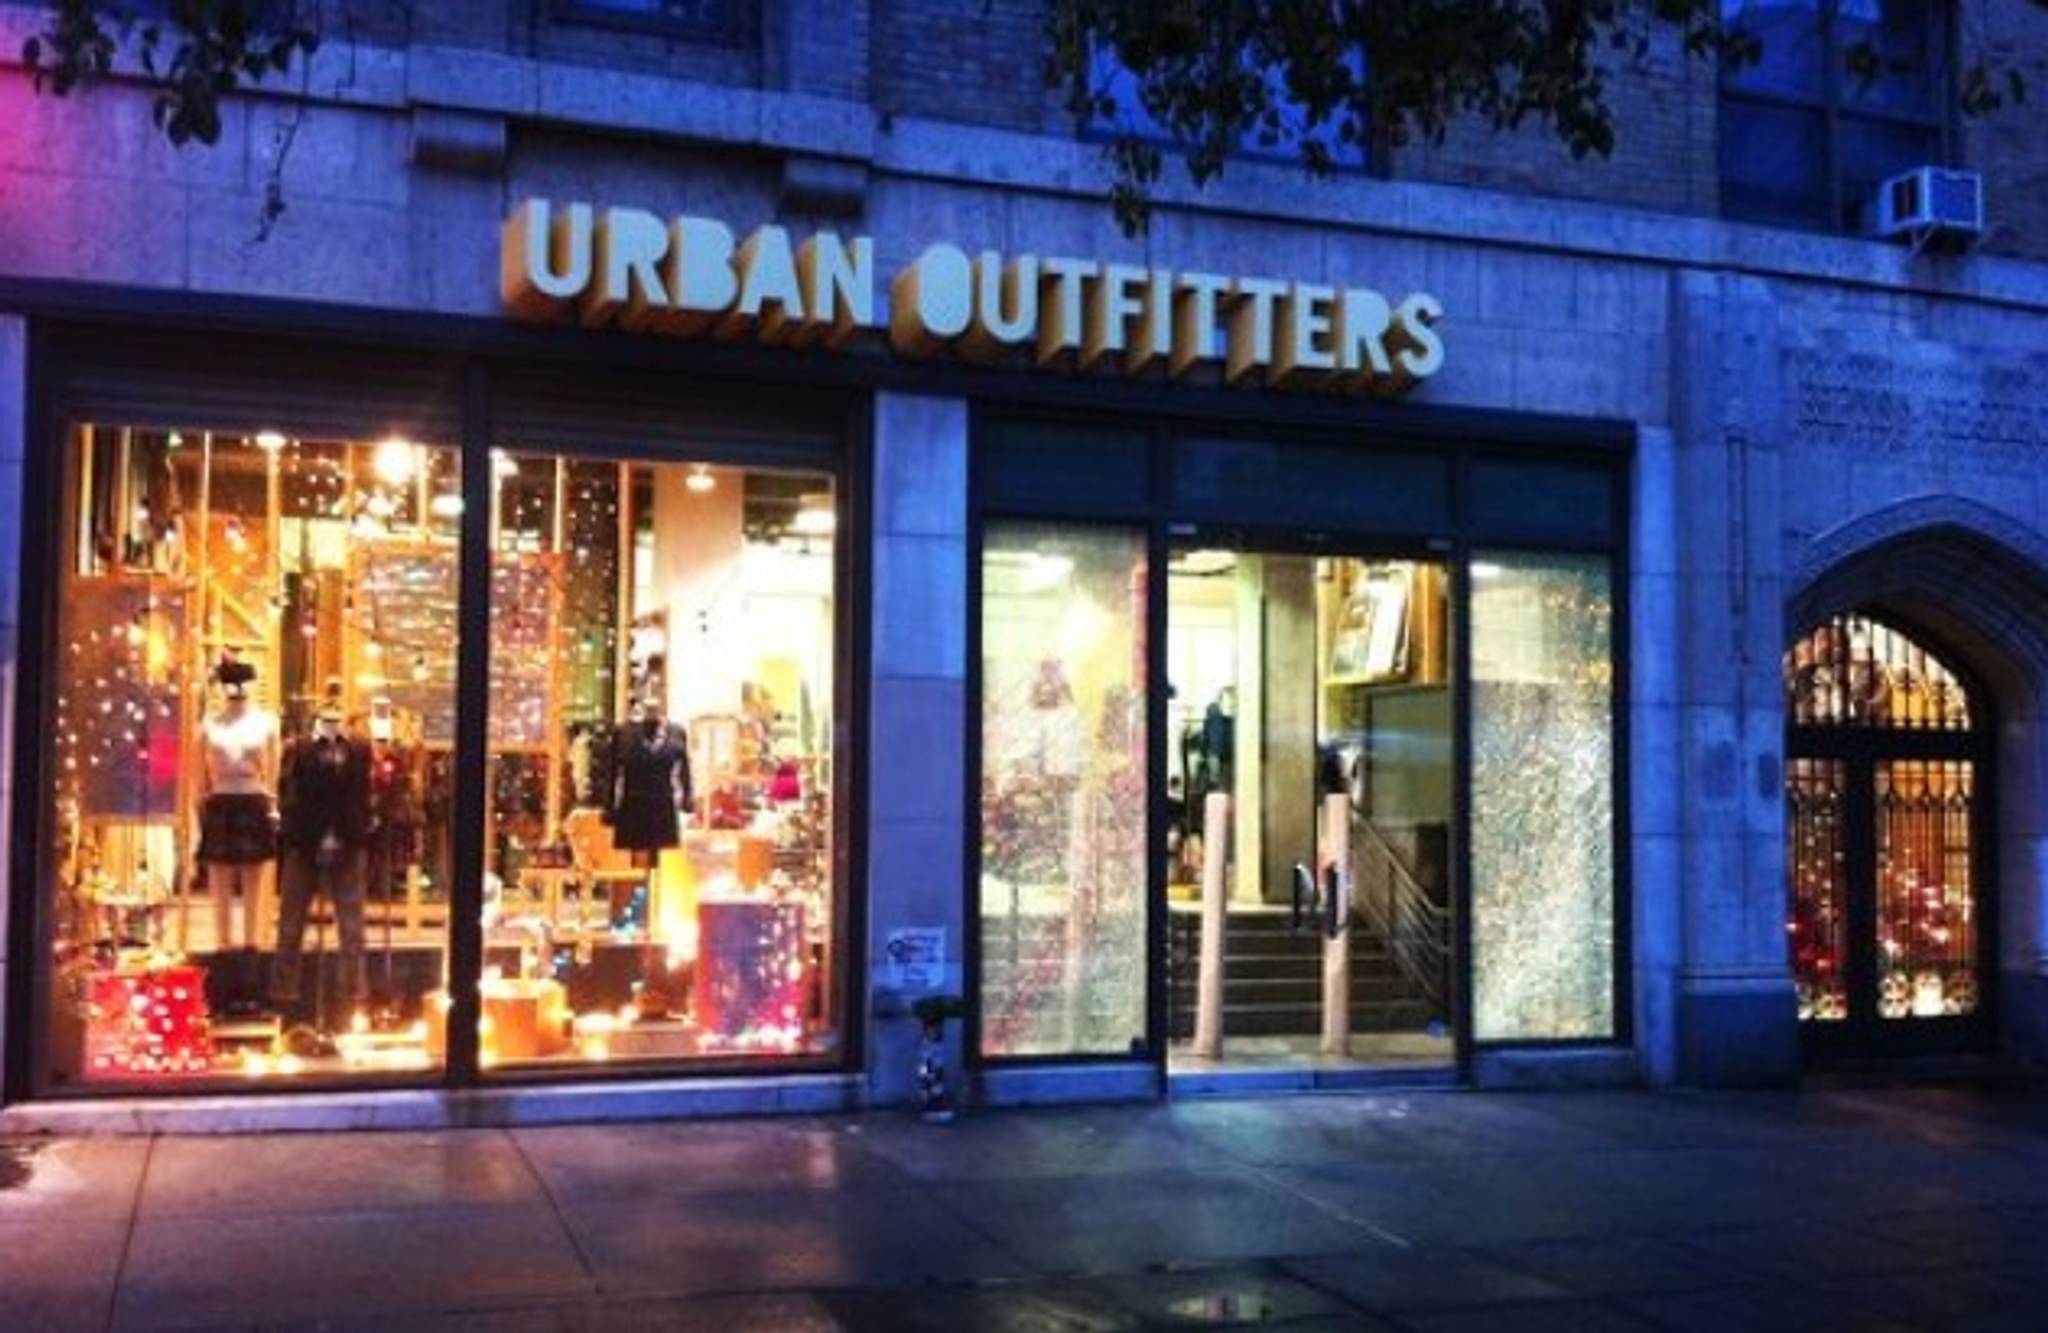 Why Urban Outfitters applied for a liquor licence